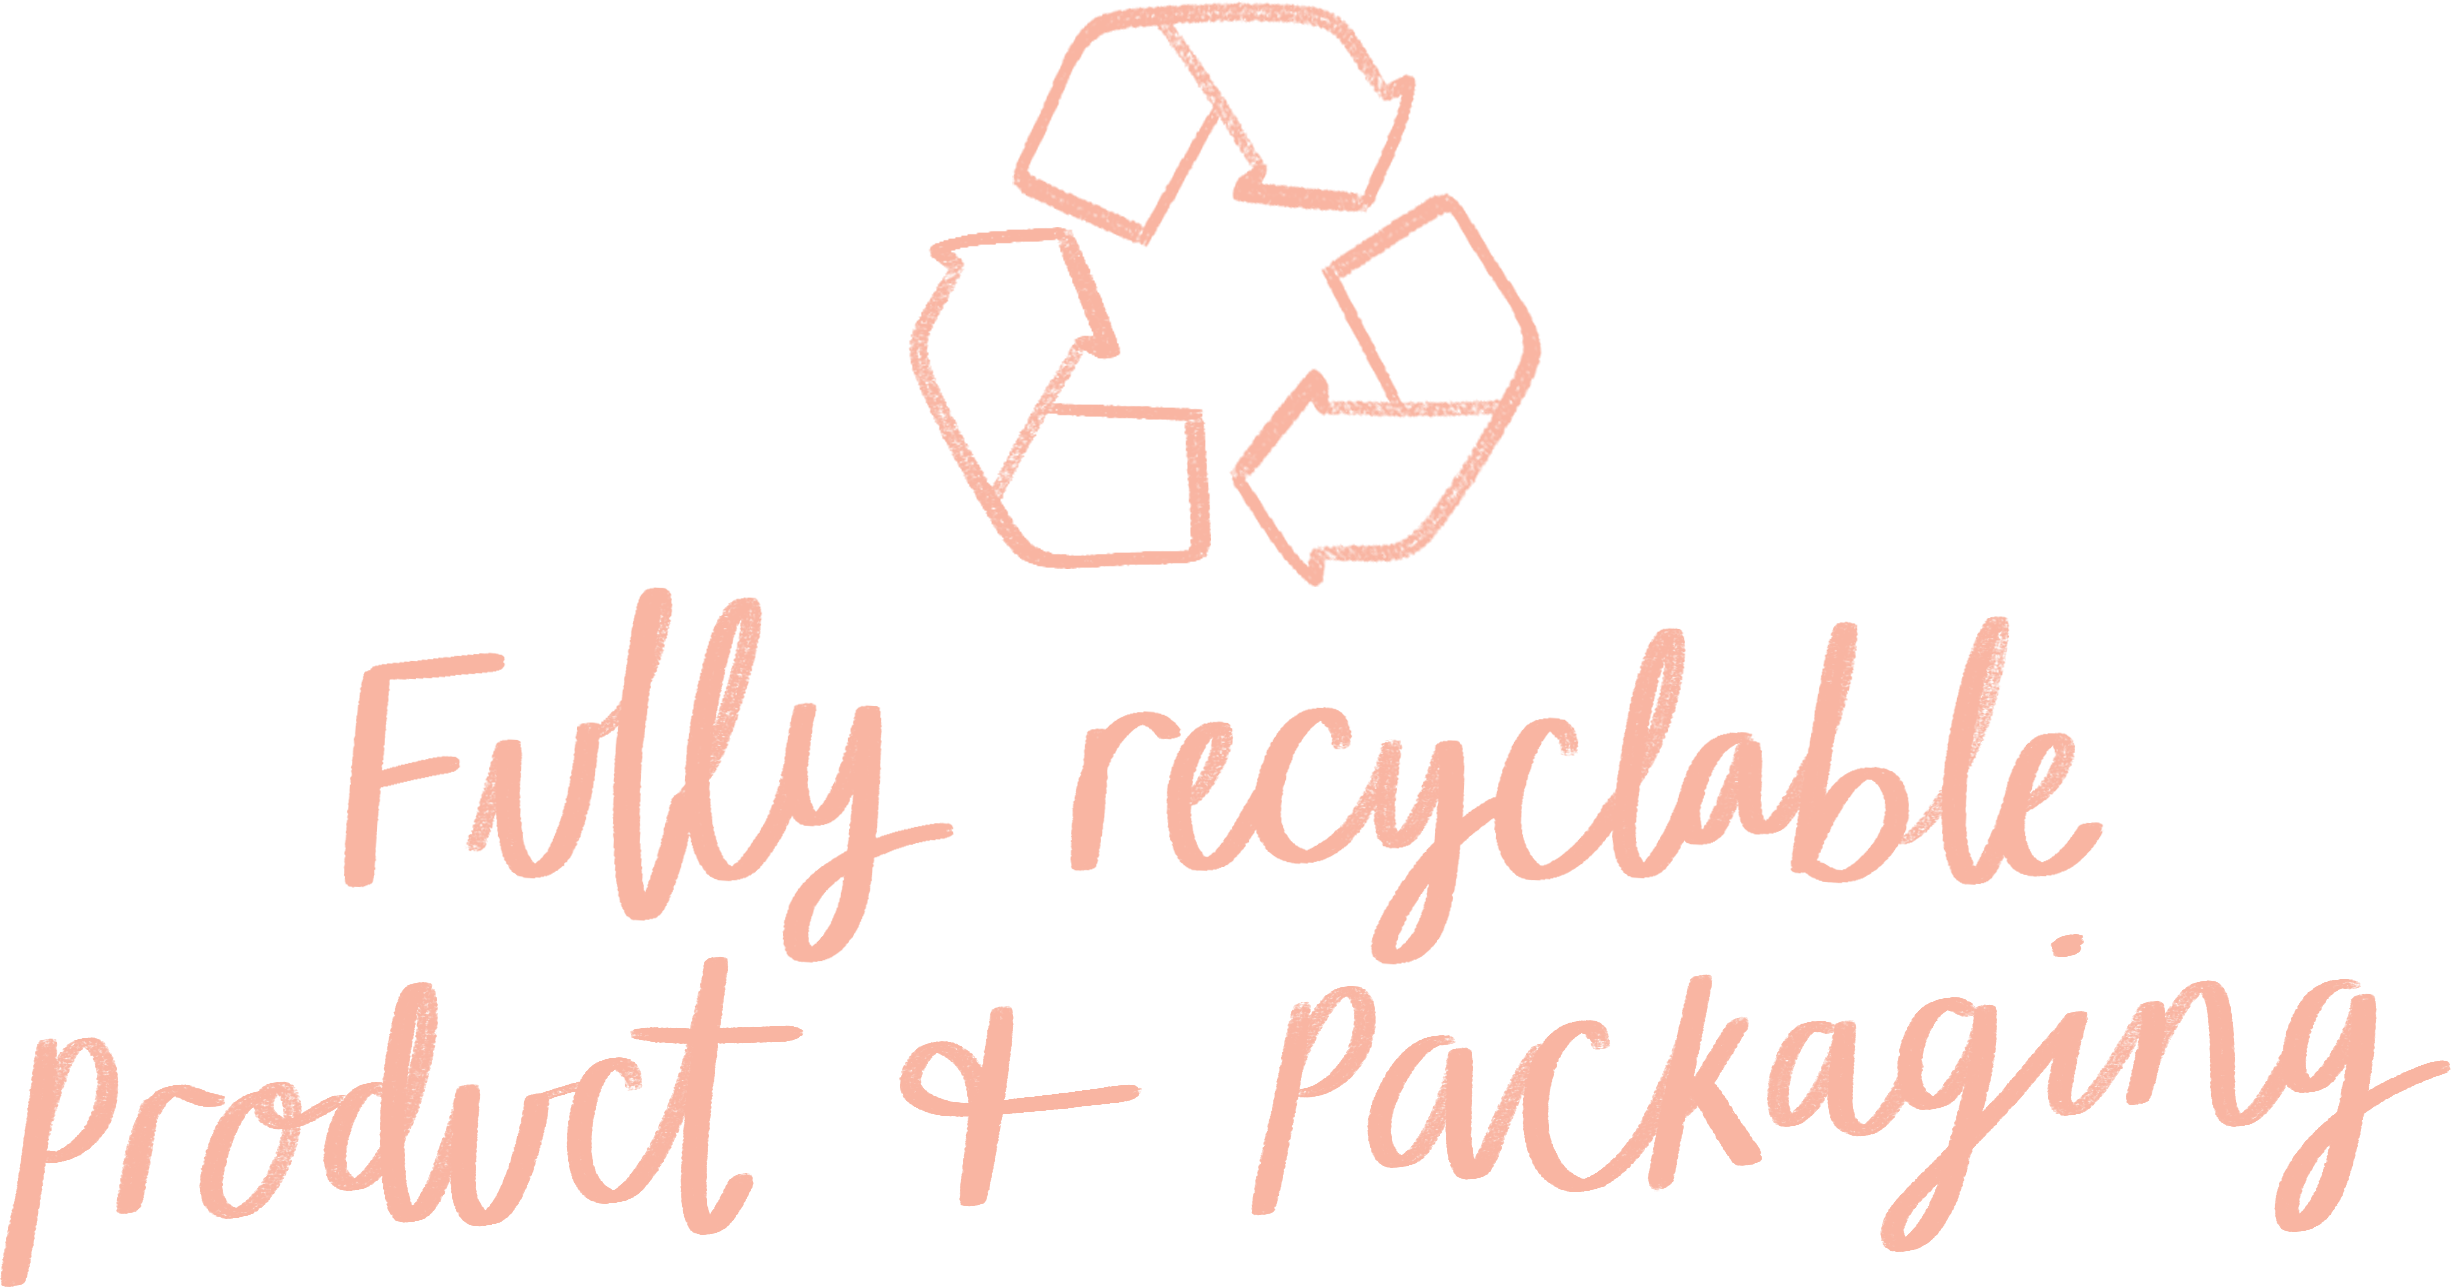 Fully recyclable product and packaging